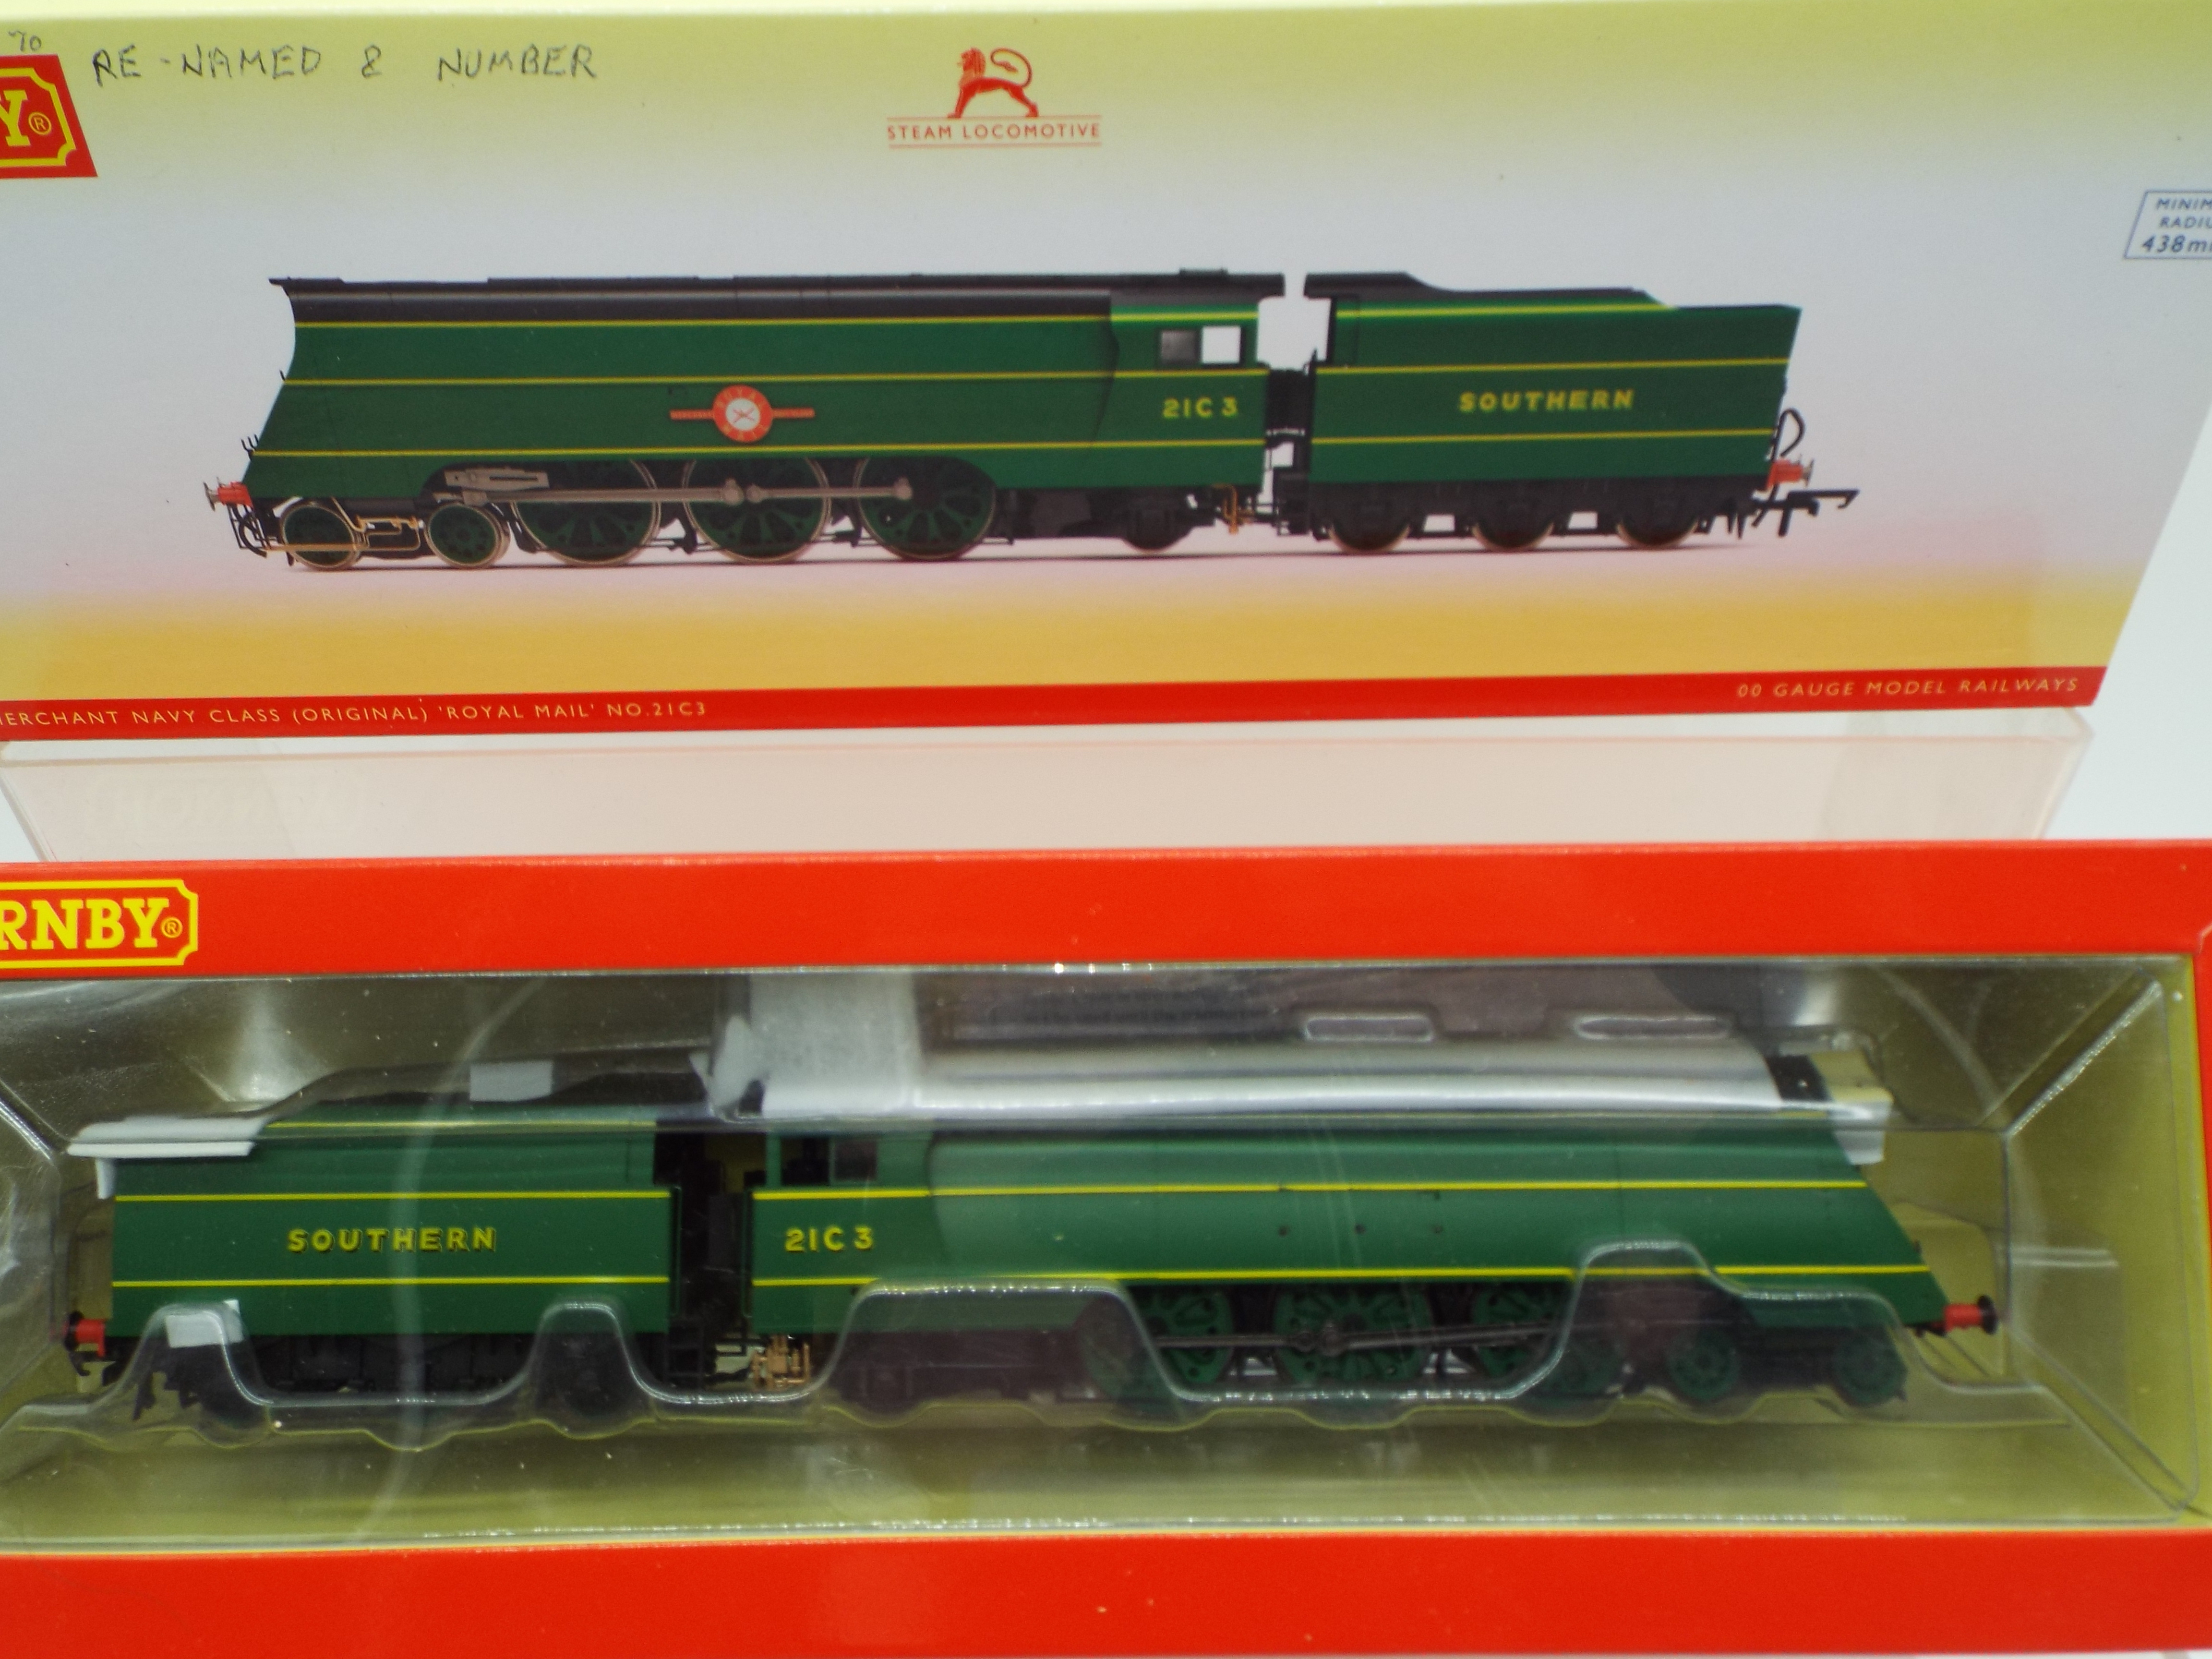 Hornby - an OO gauge DCC Ready model 4-6-2 locomotive and tender running no 21C3 'Channel Packet',